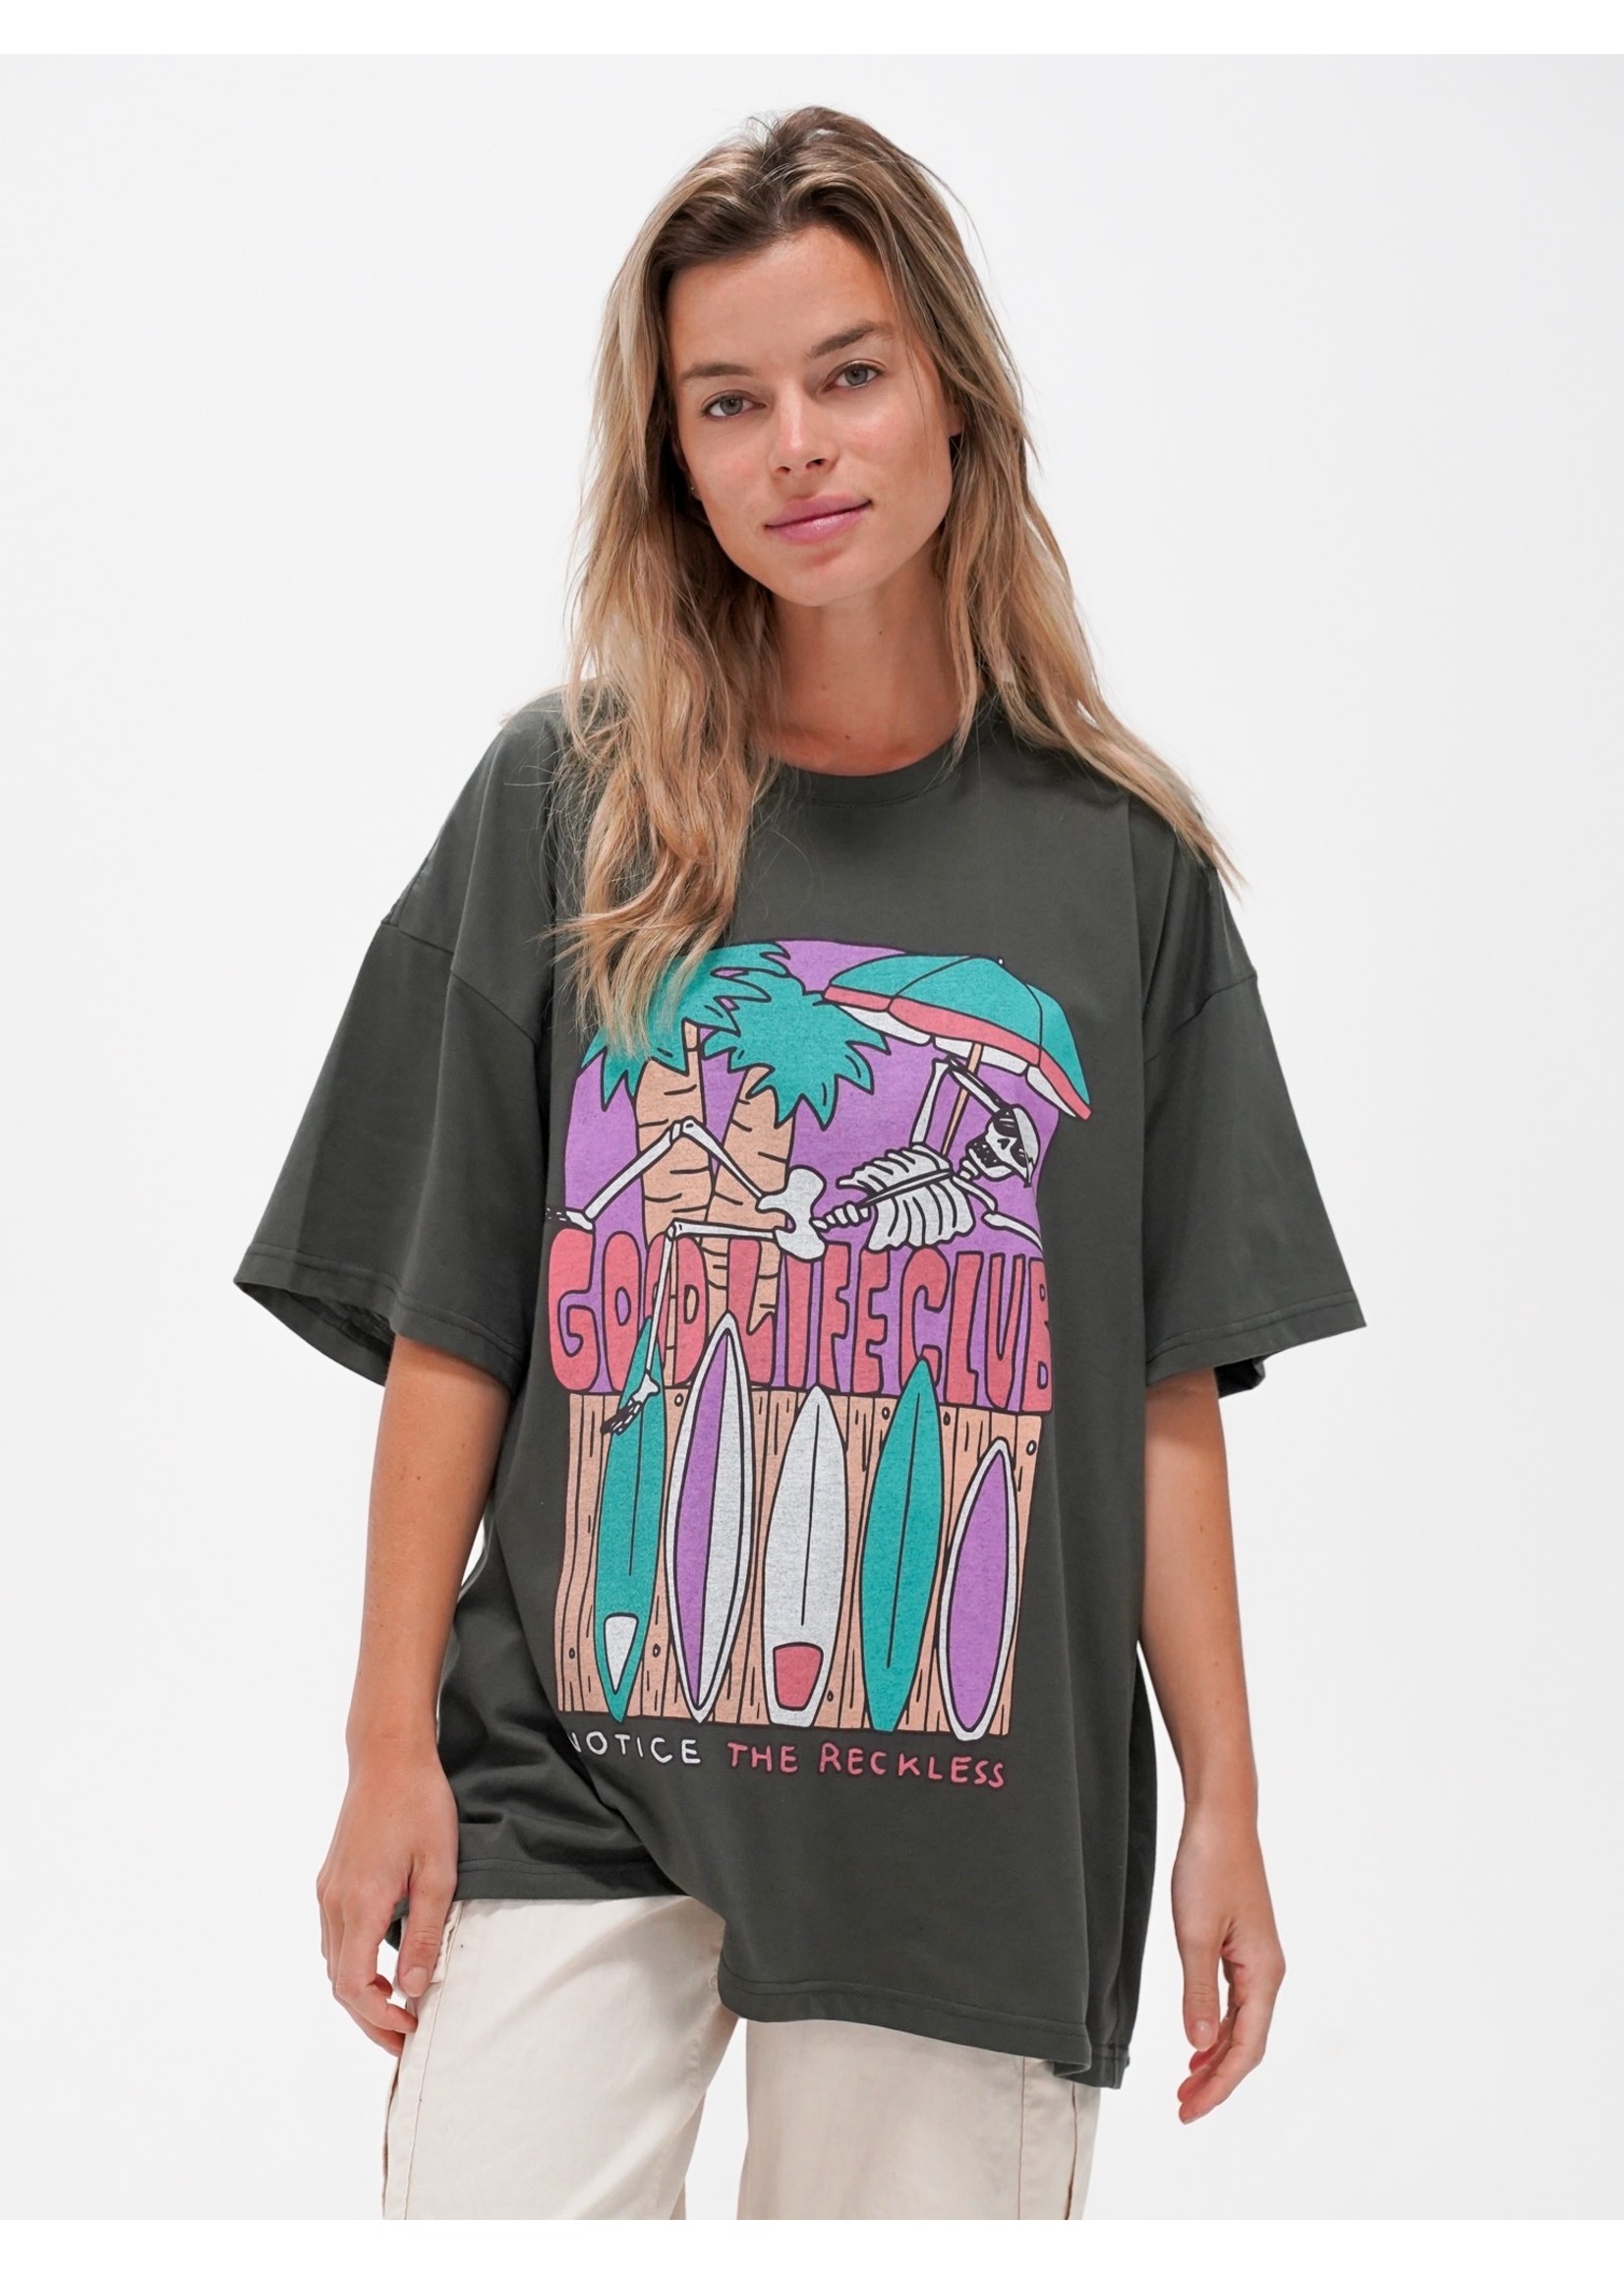 Notice The Reckless - Surf Camp Oversize Tee - Revelstoke Trading Post